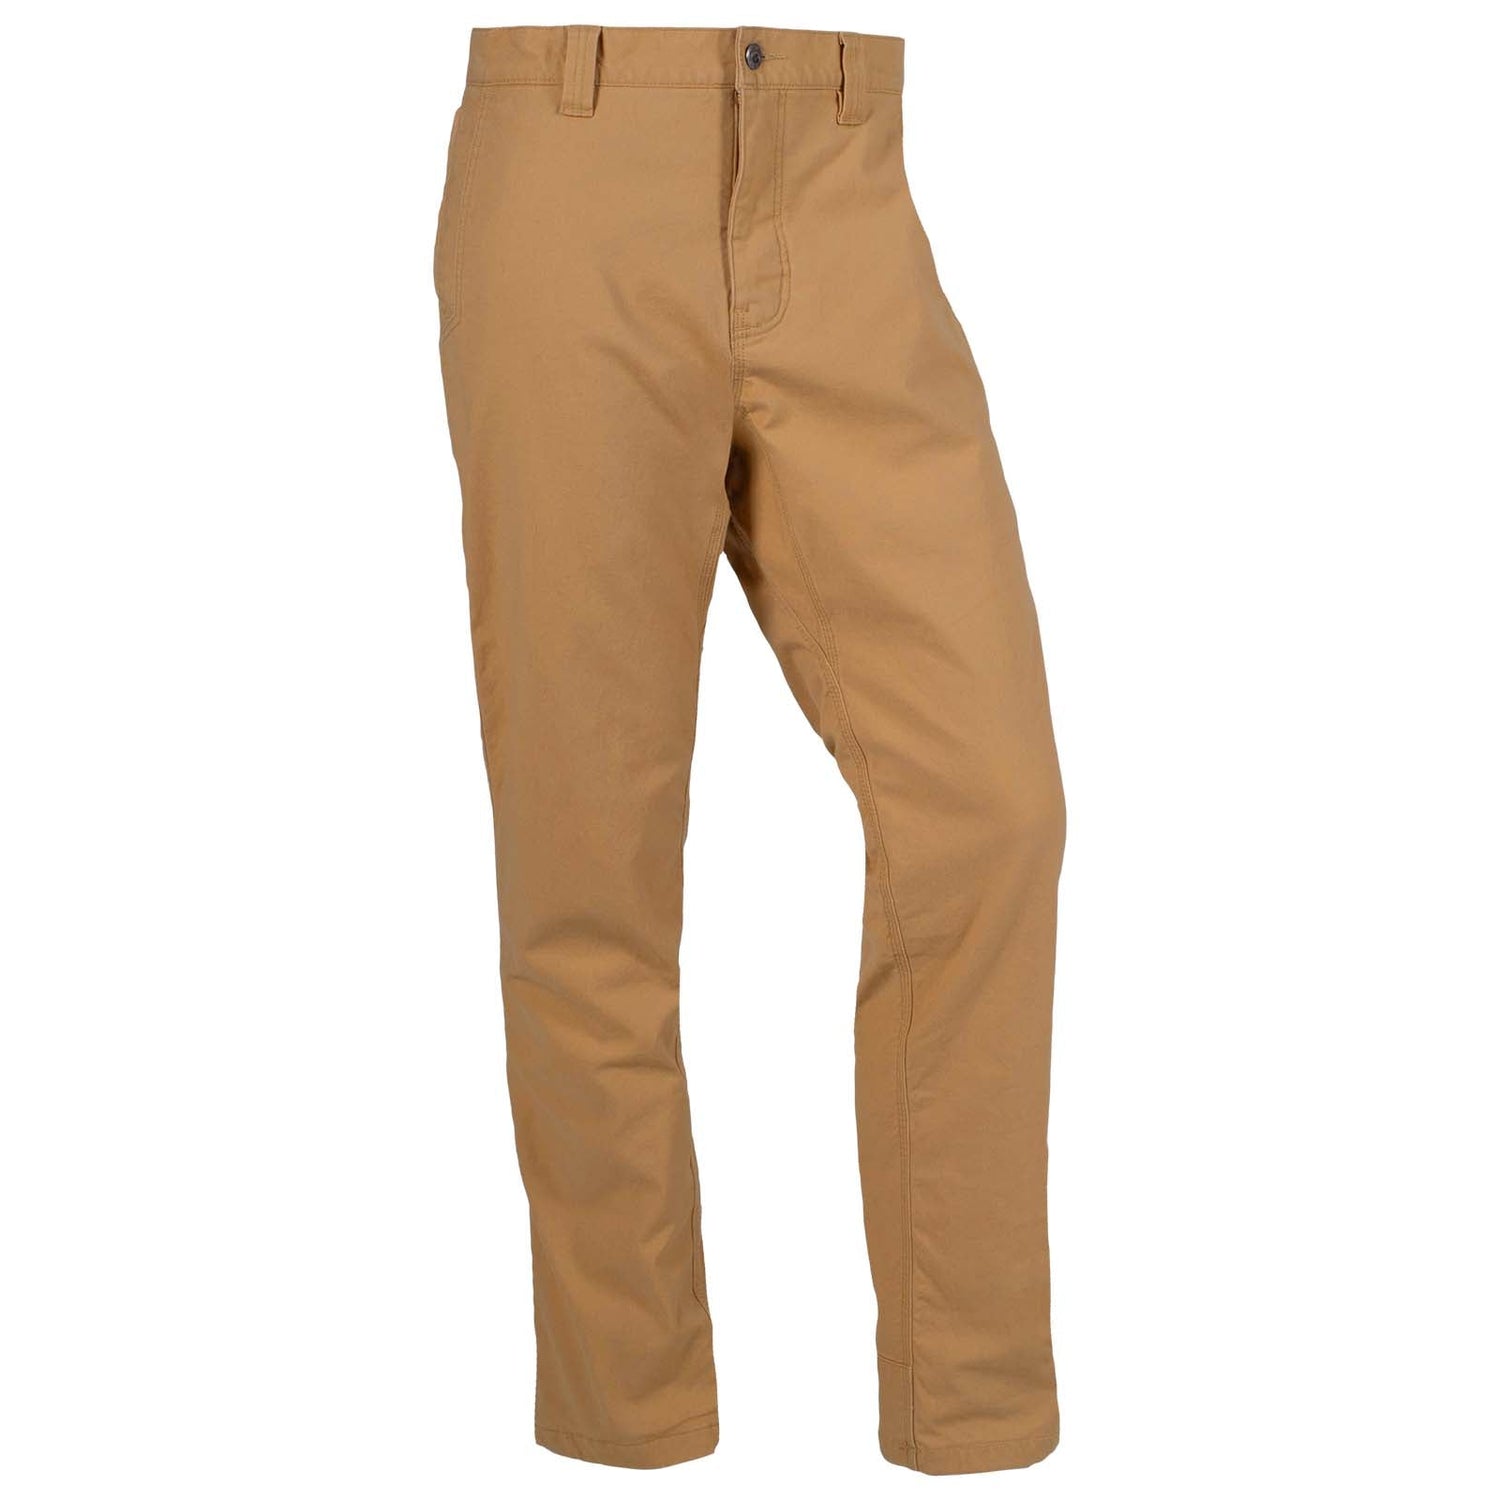 Mountain Pants New Classic Fit view of tobacco